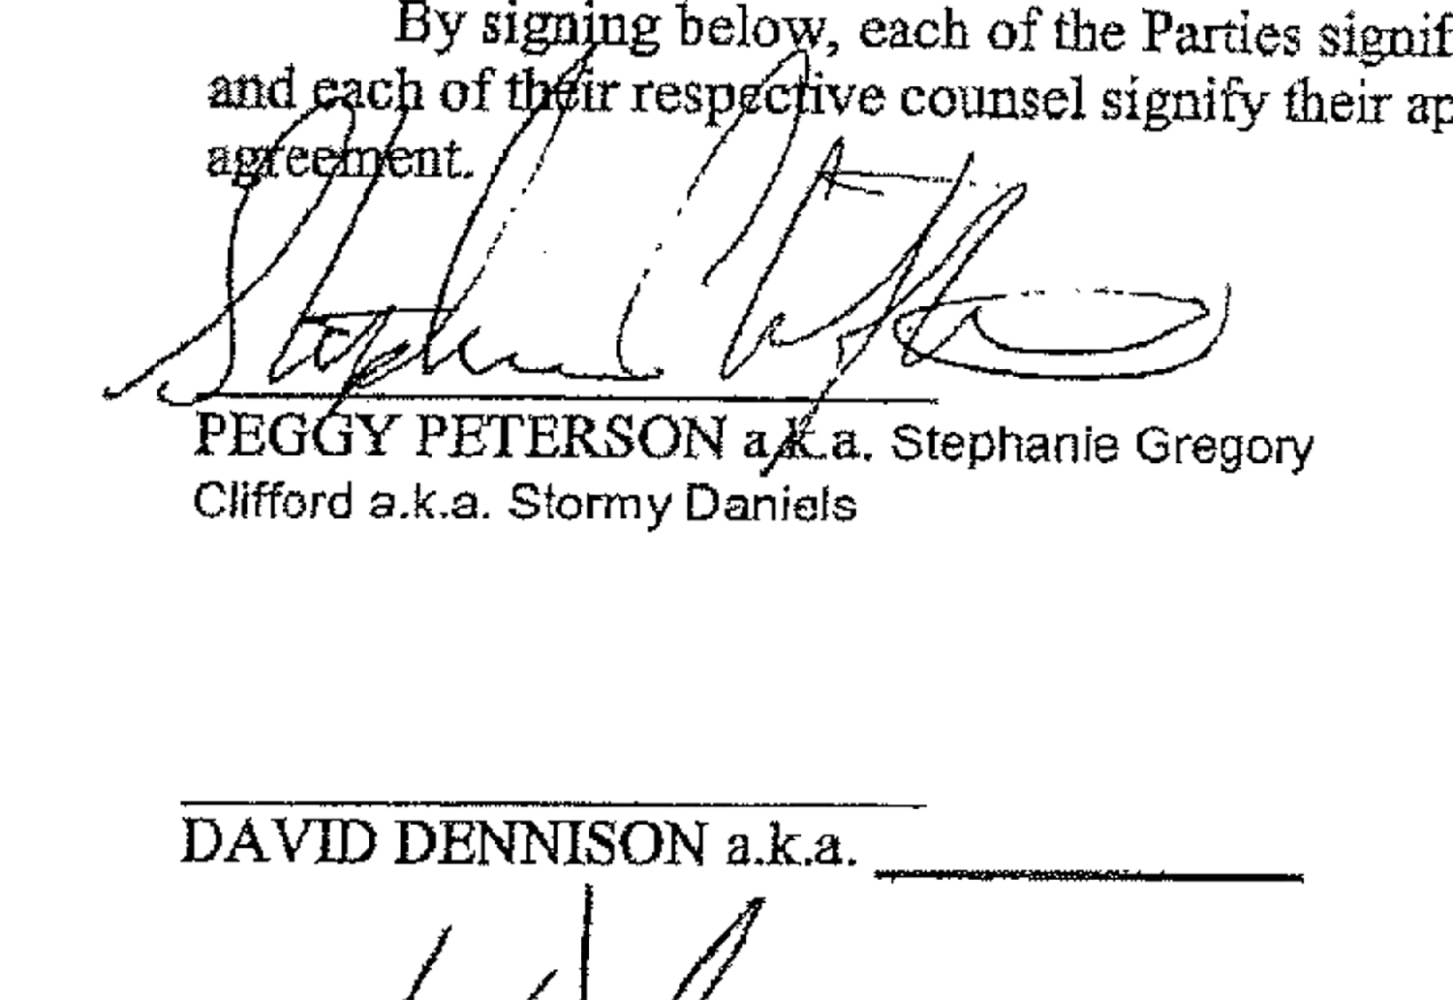 The signature page from the side letter agreement has a signature from Stephanie Clifford as 